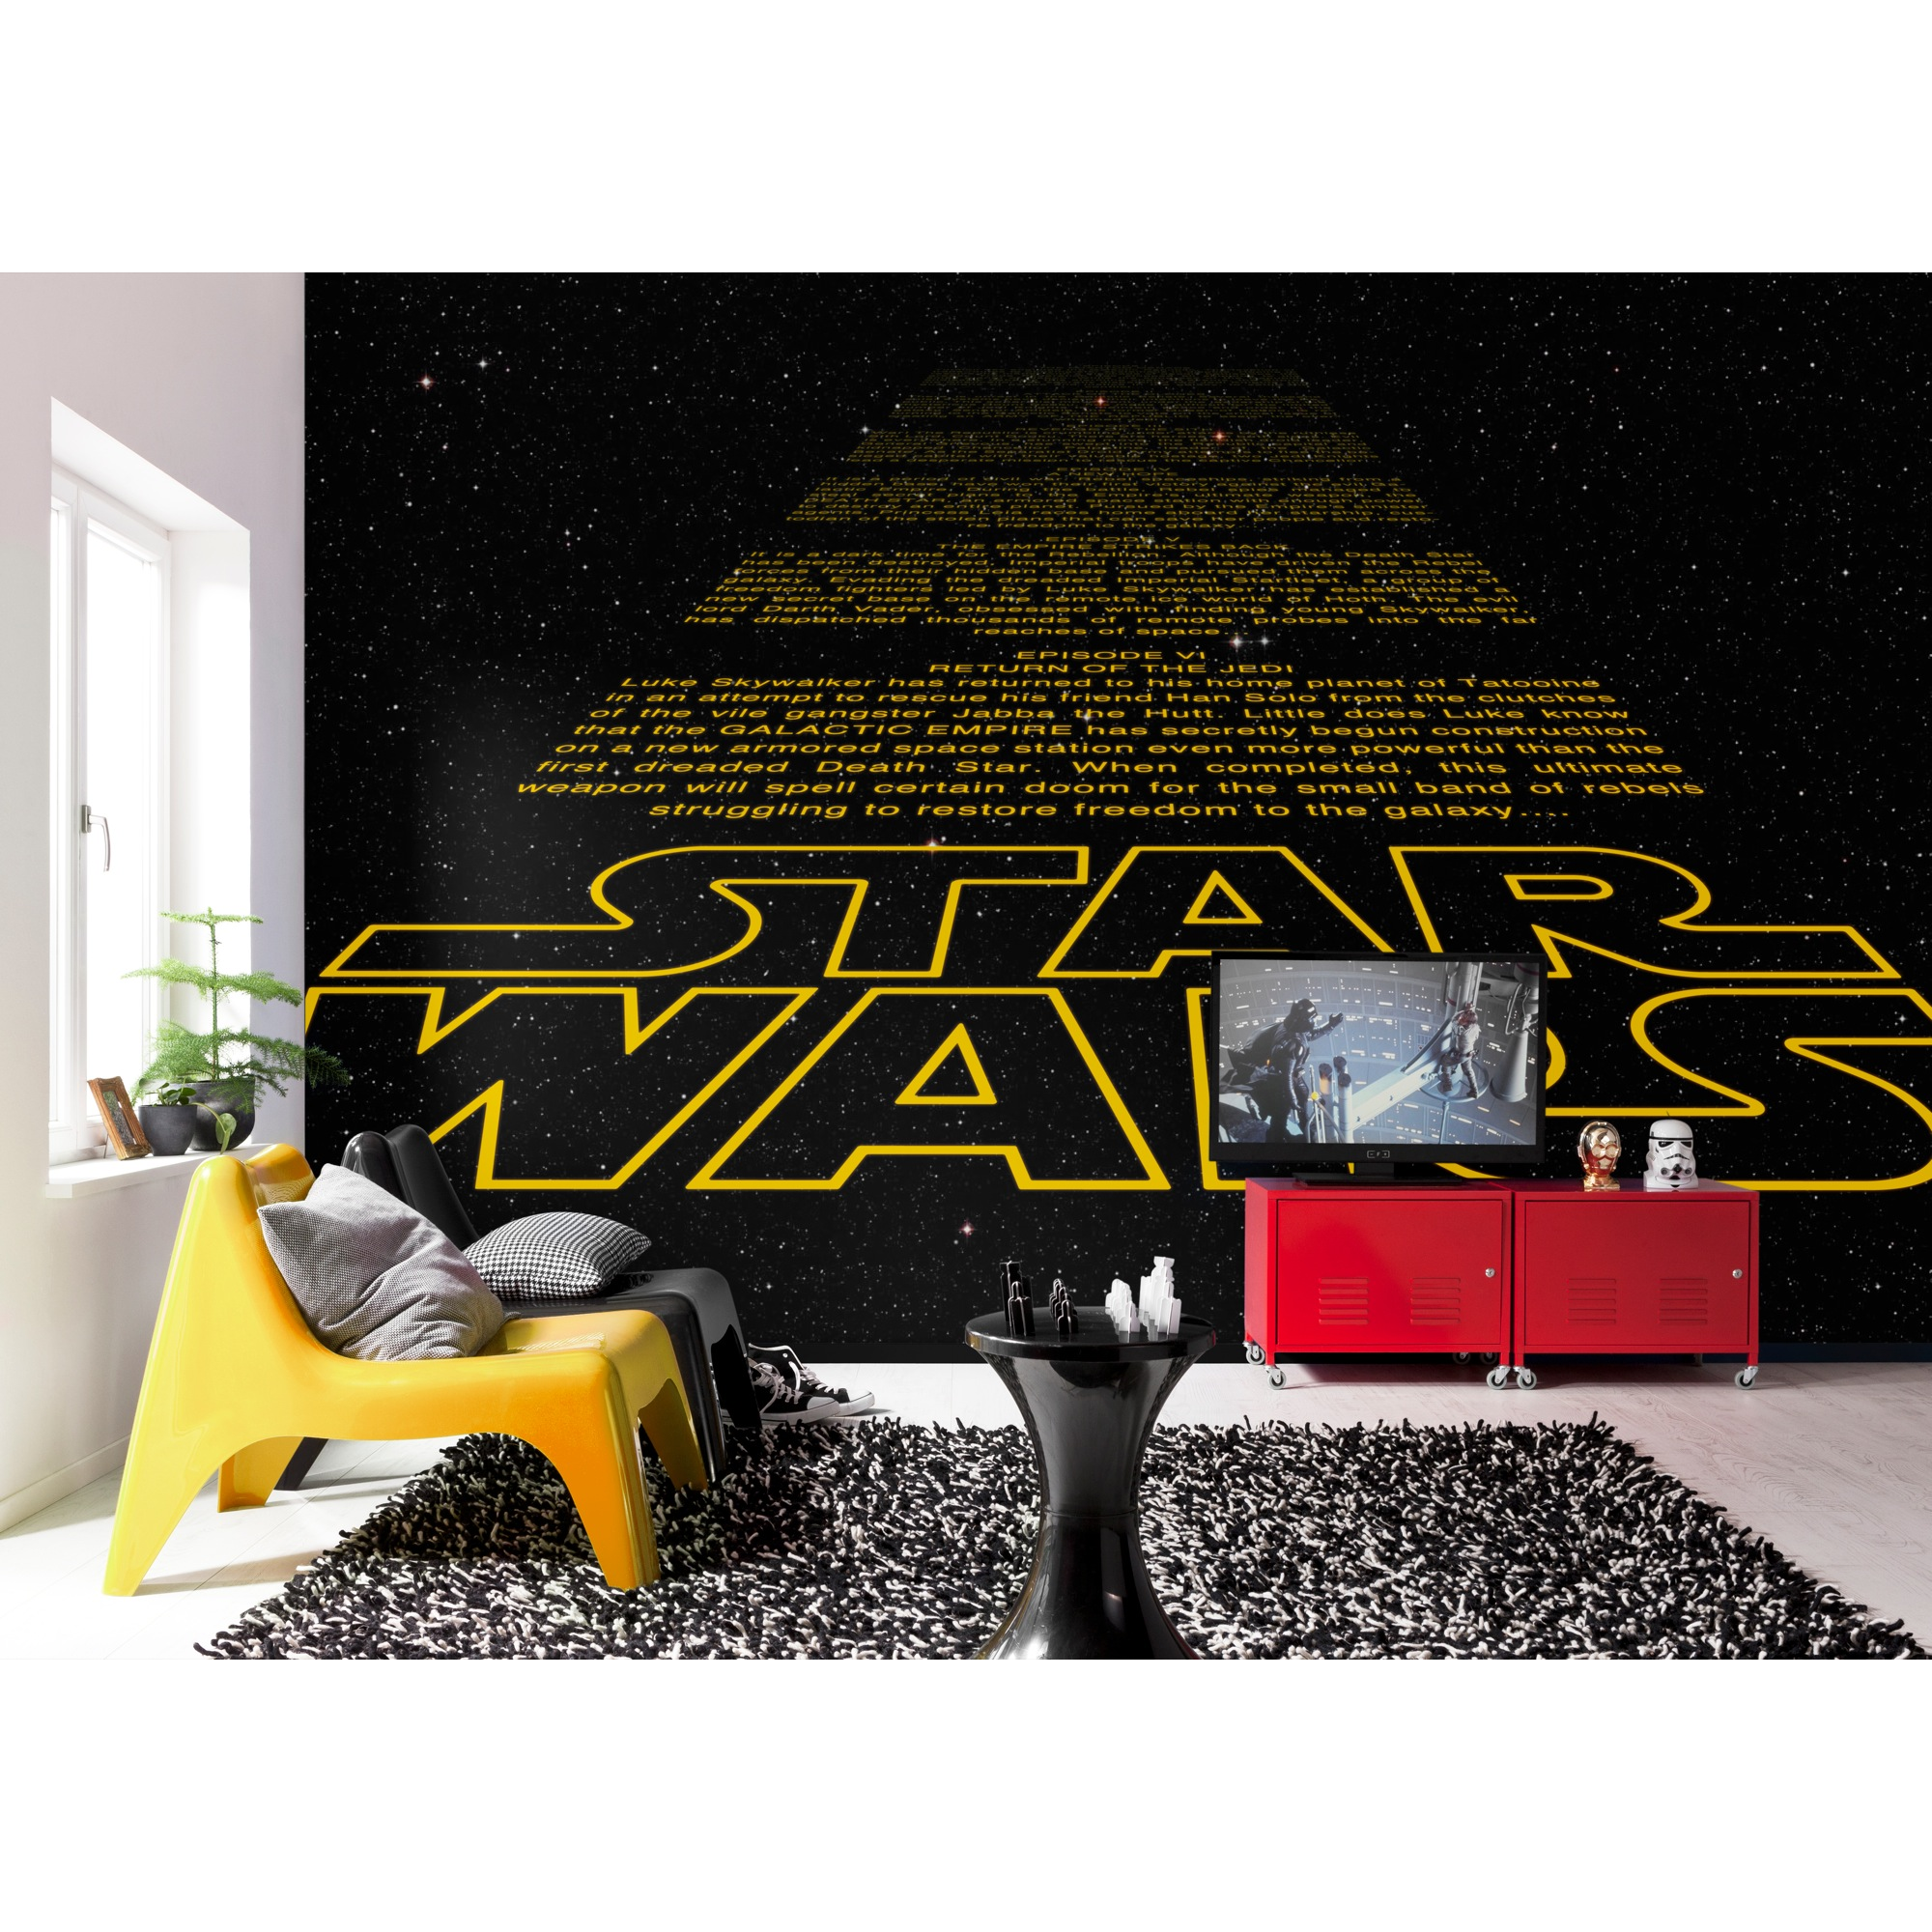 Fototapete 'Star Wars Intro' 368 x 254 cm + product picture